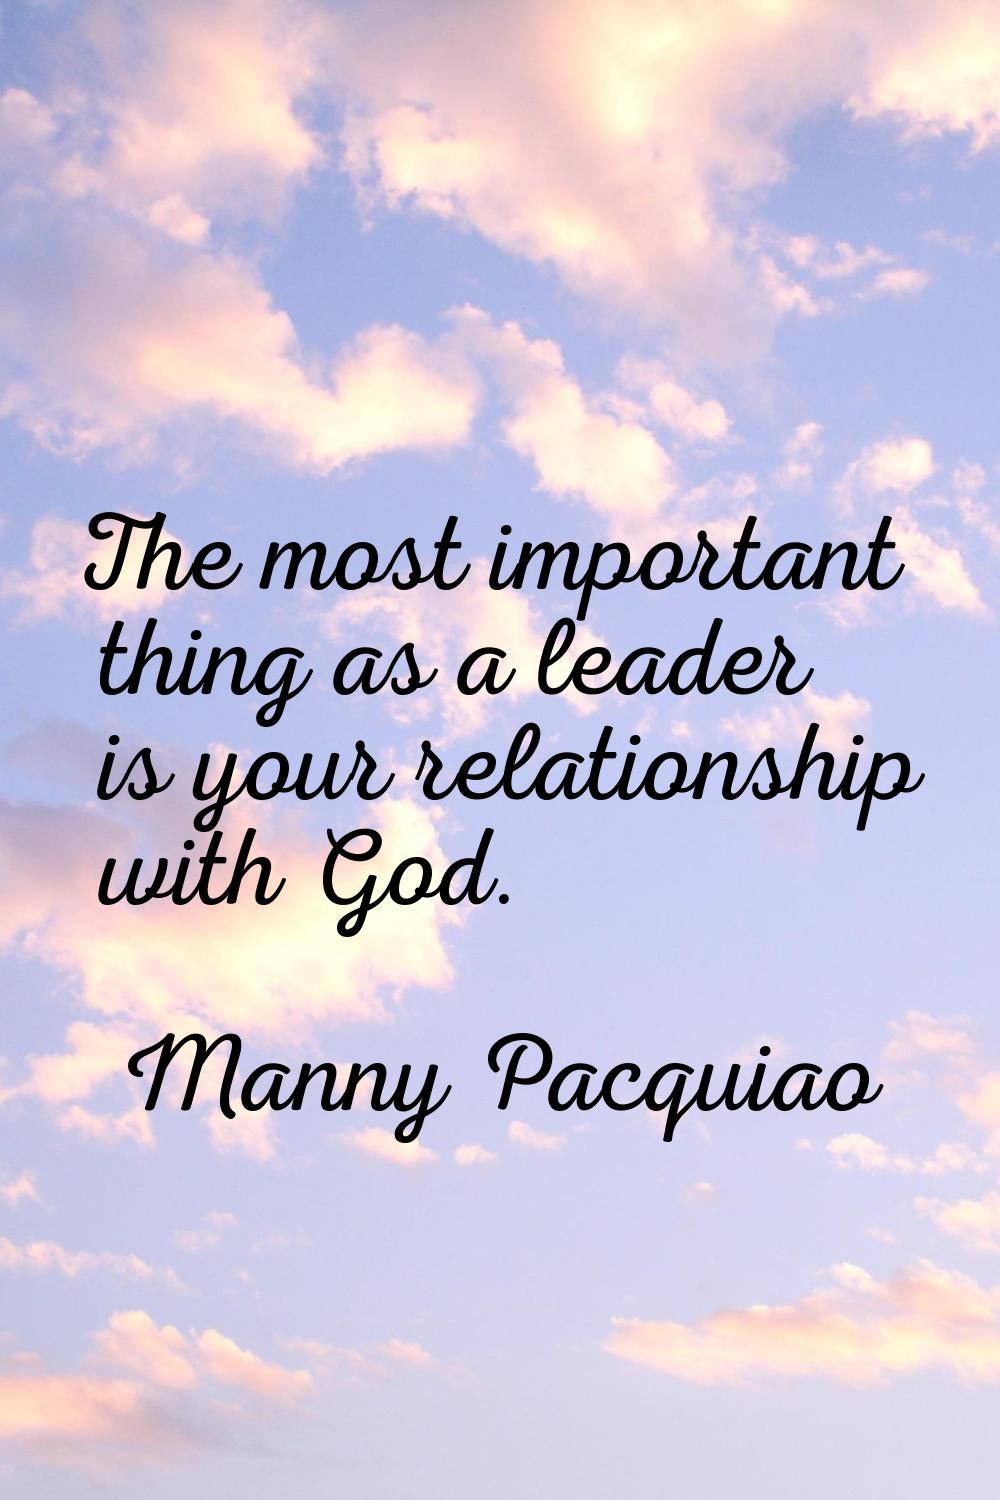 The most important thing as a leader is your relationship with God.